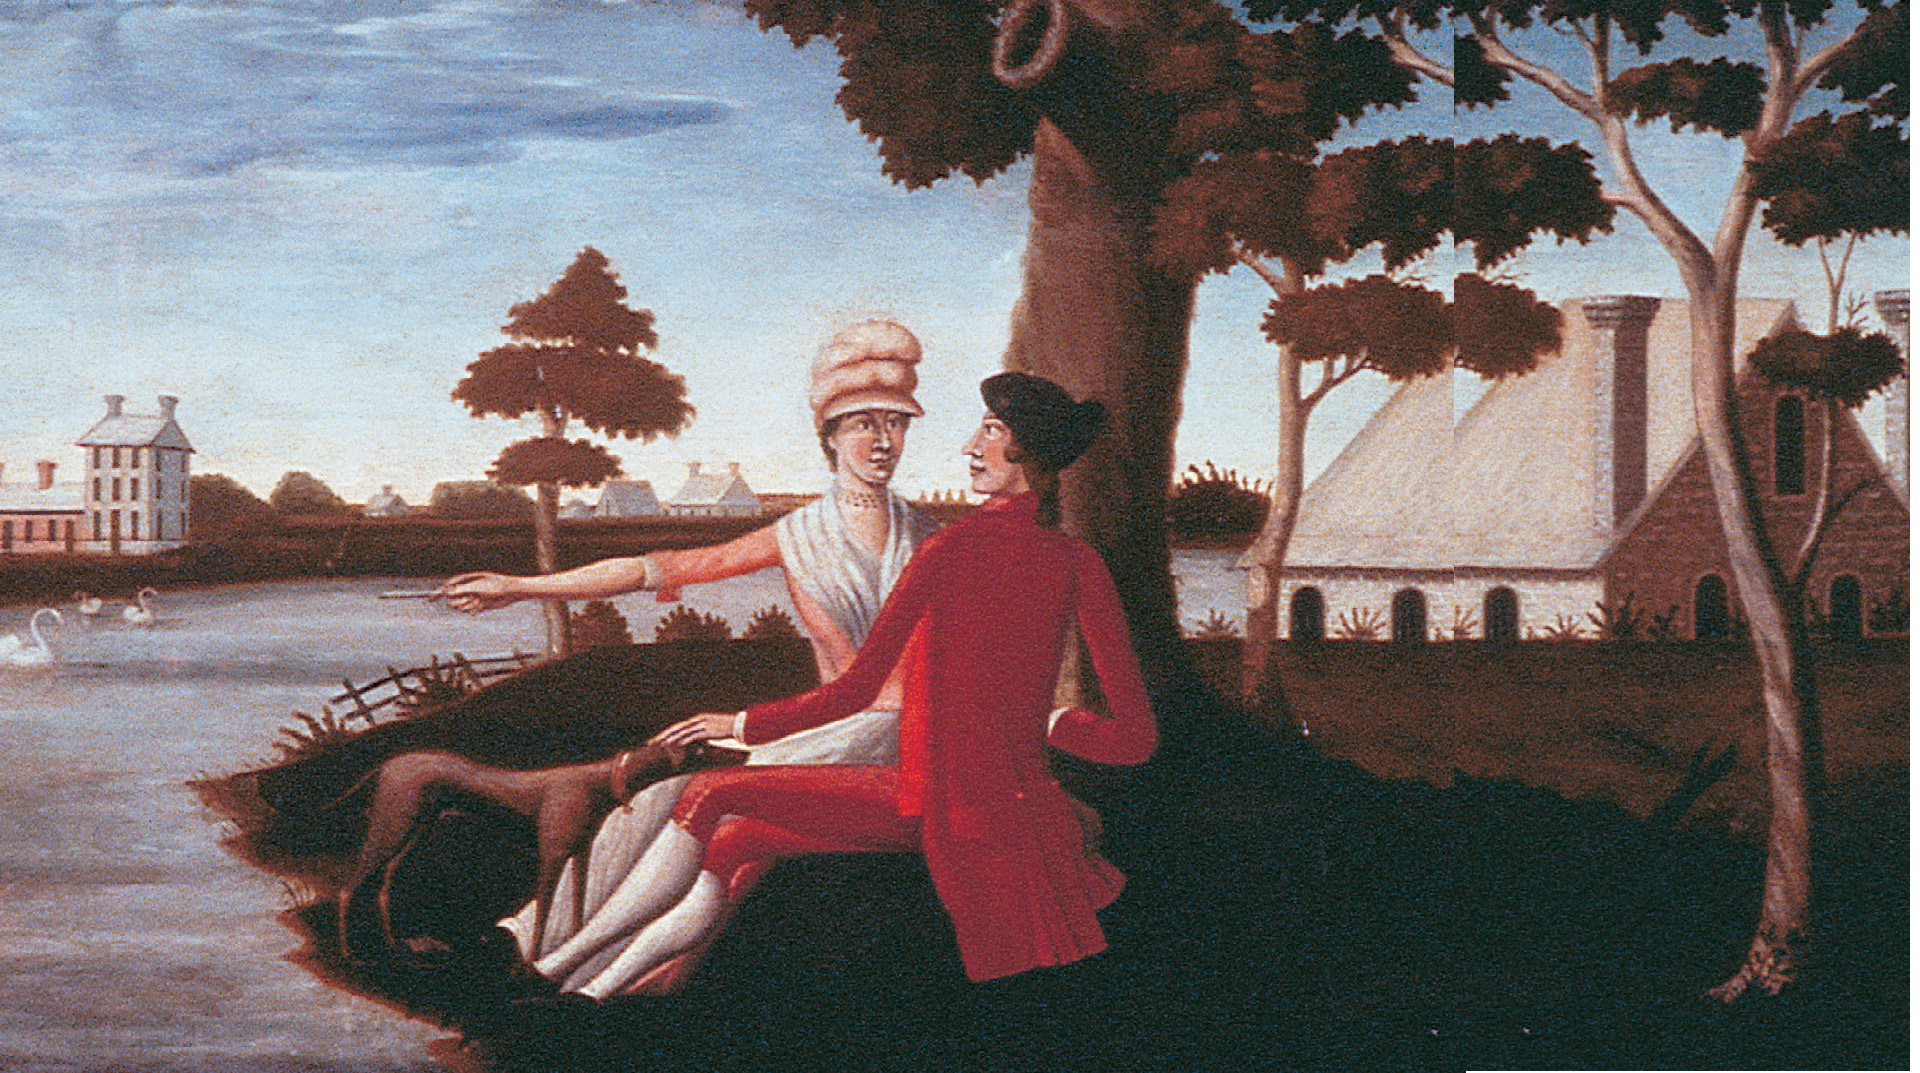 painting: a couple sits together under a tree.